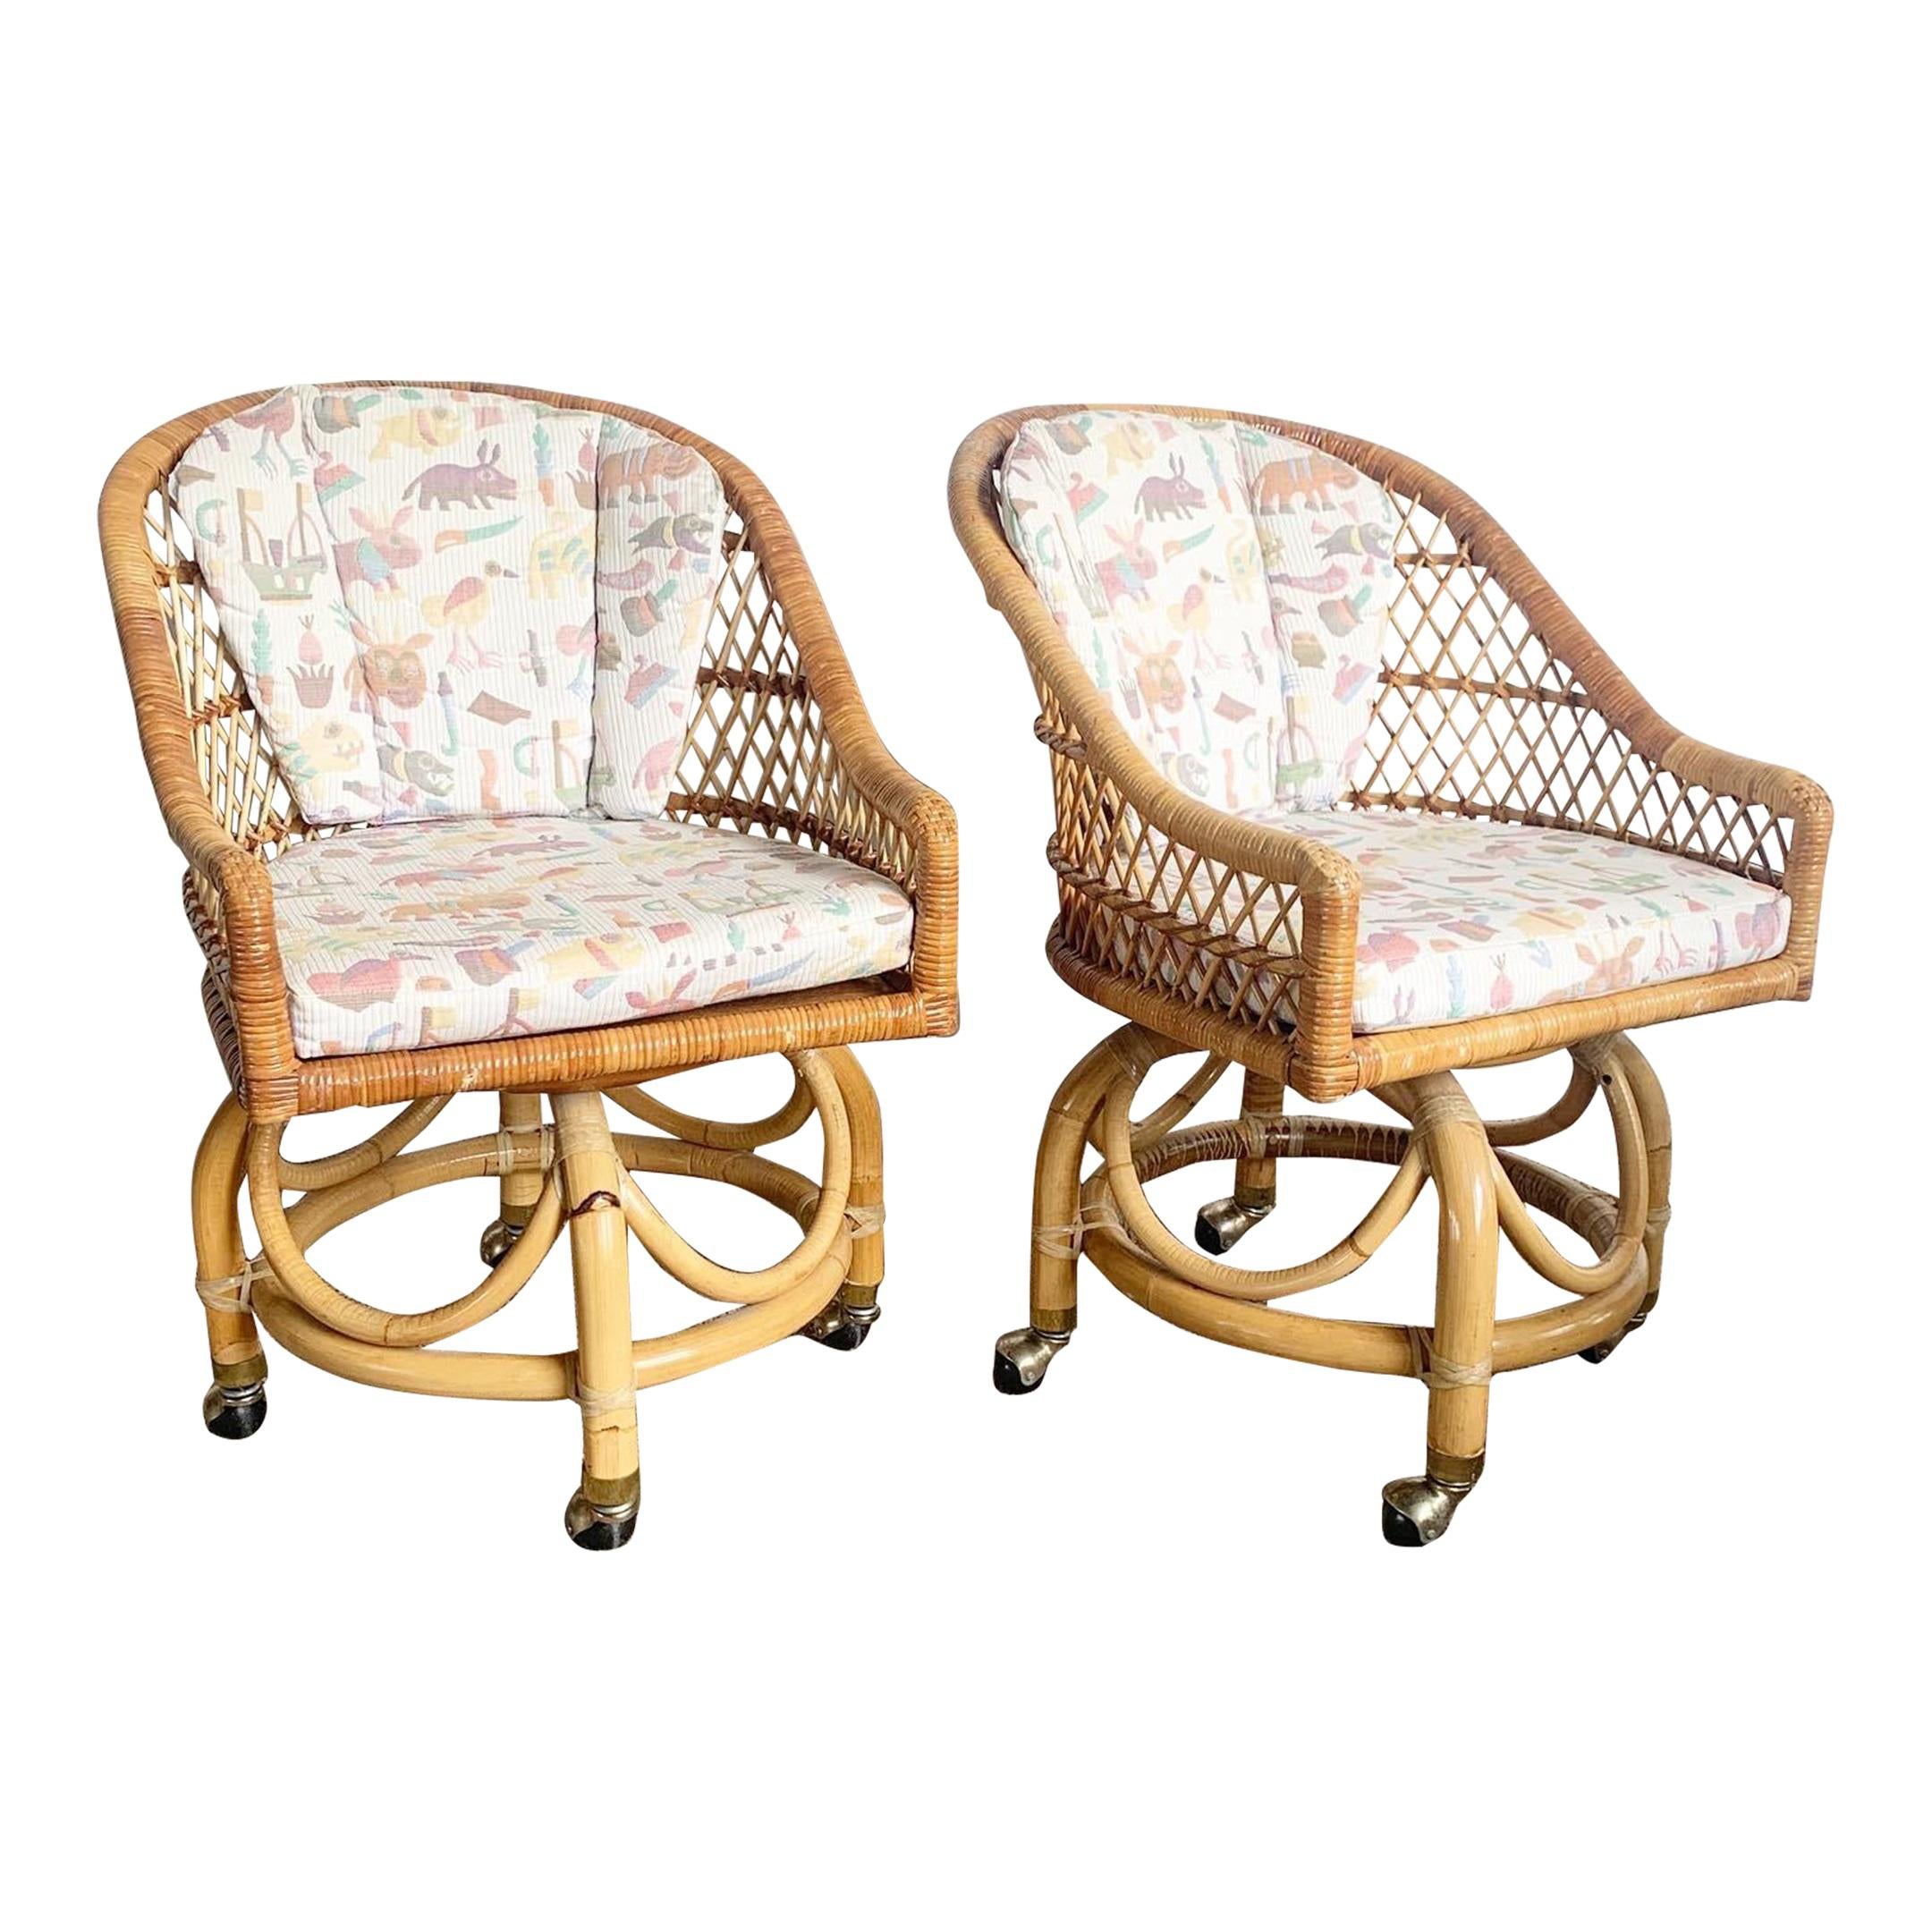 Boho Chic Buri Rattan Swivel Dining Chairs With Multi Color Animal Upholstery